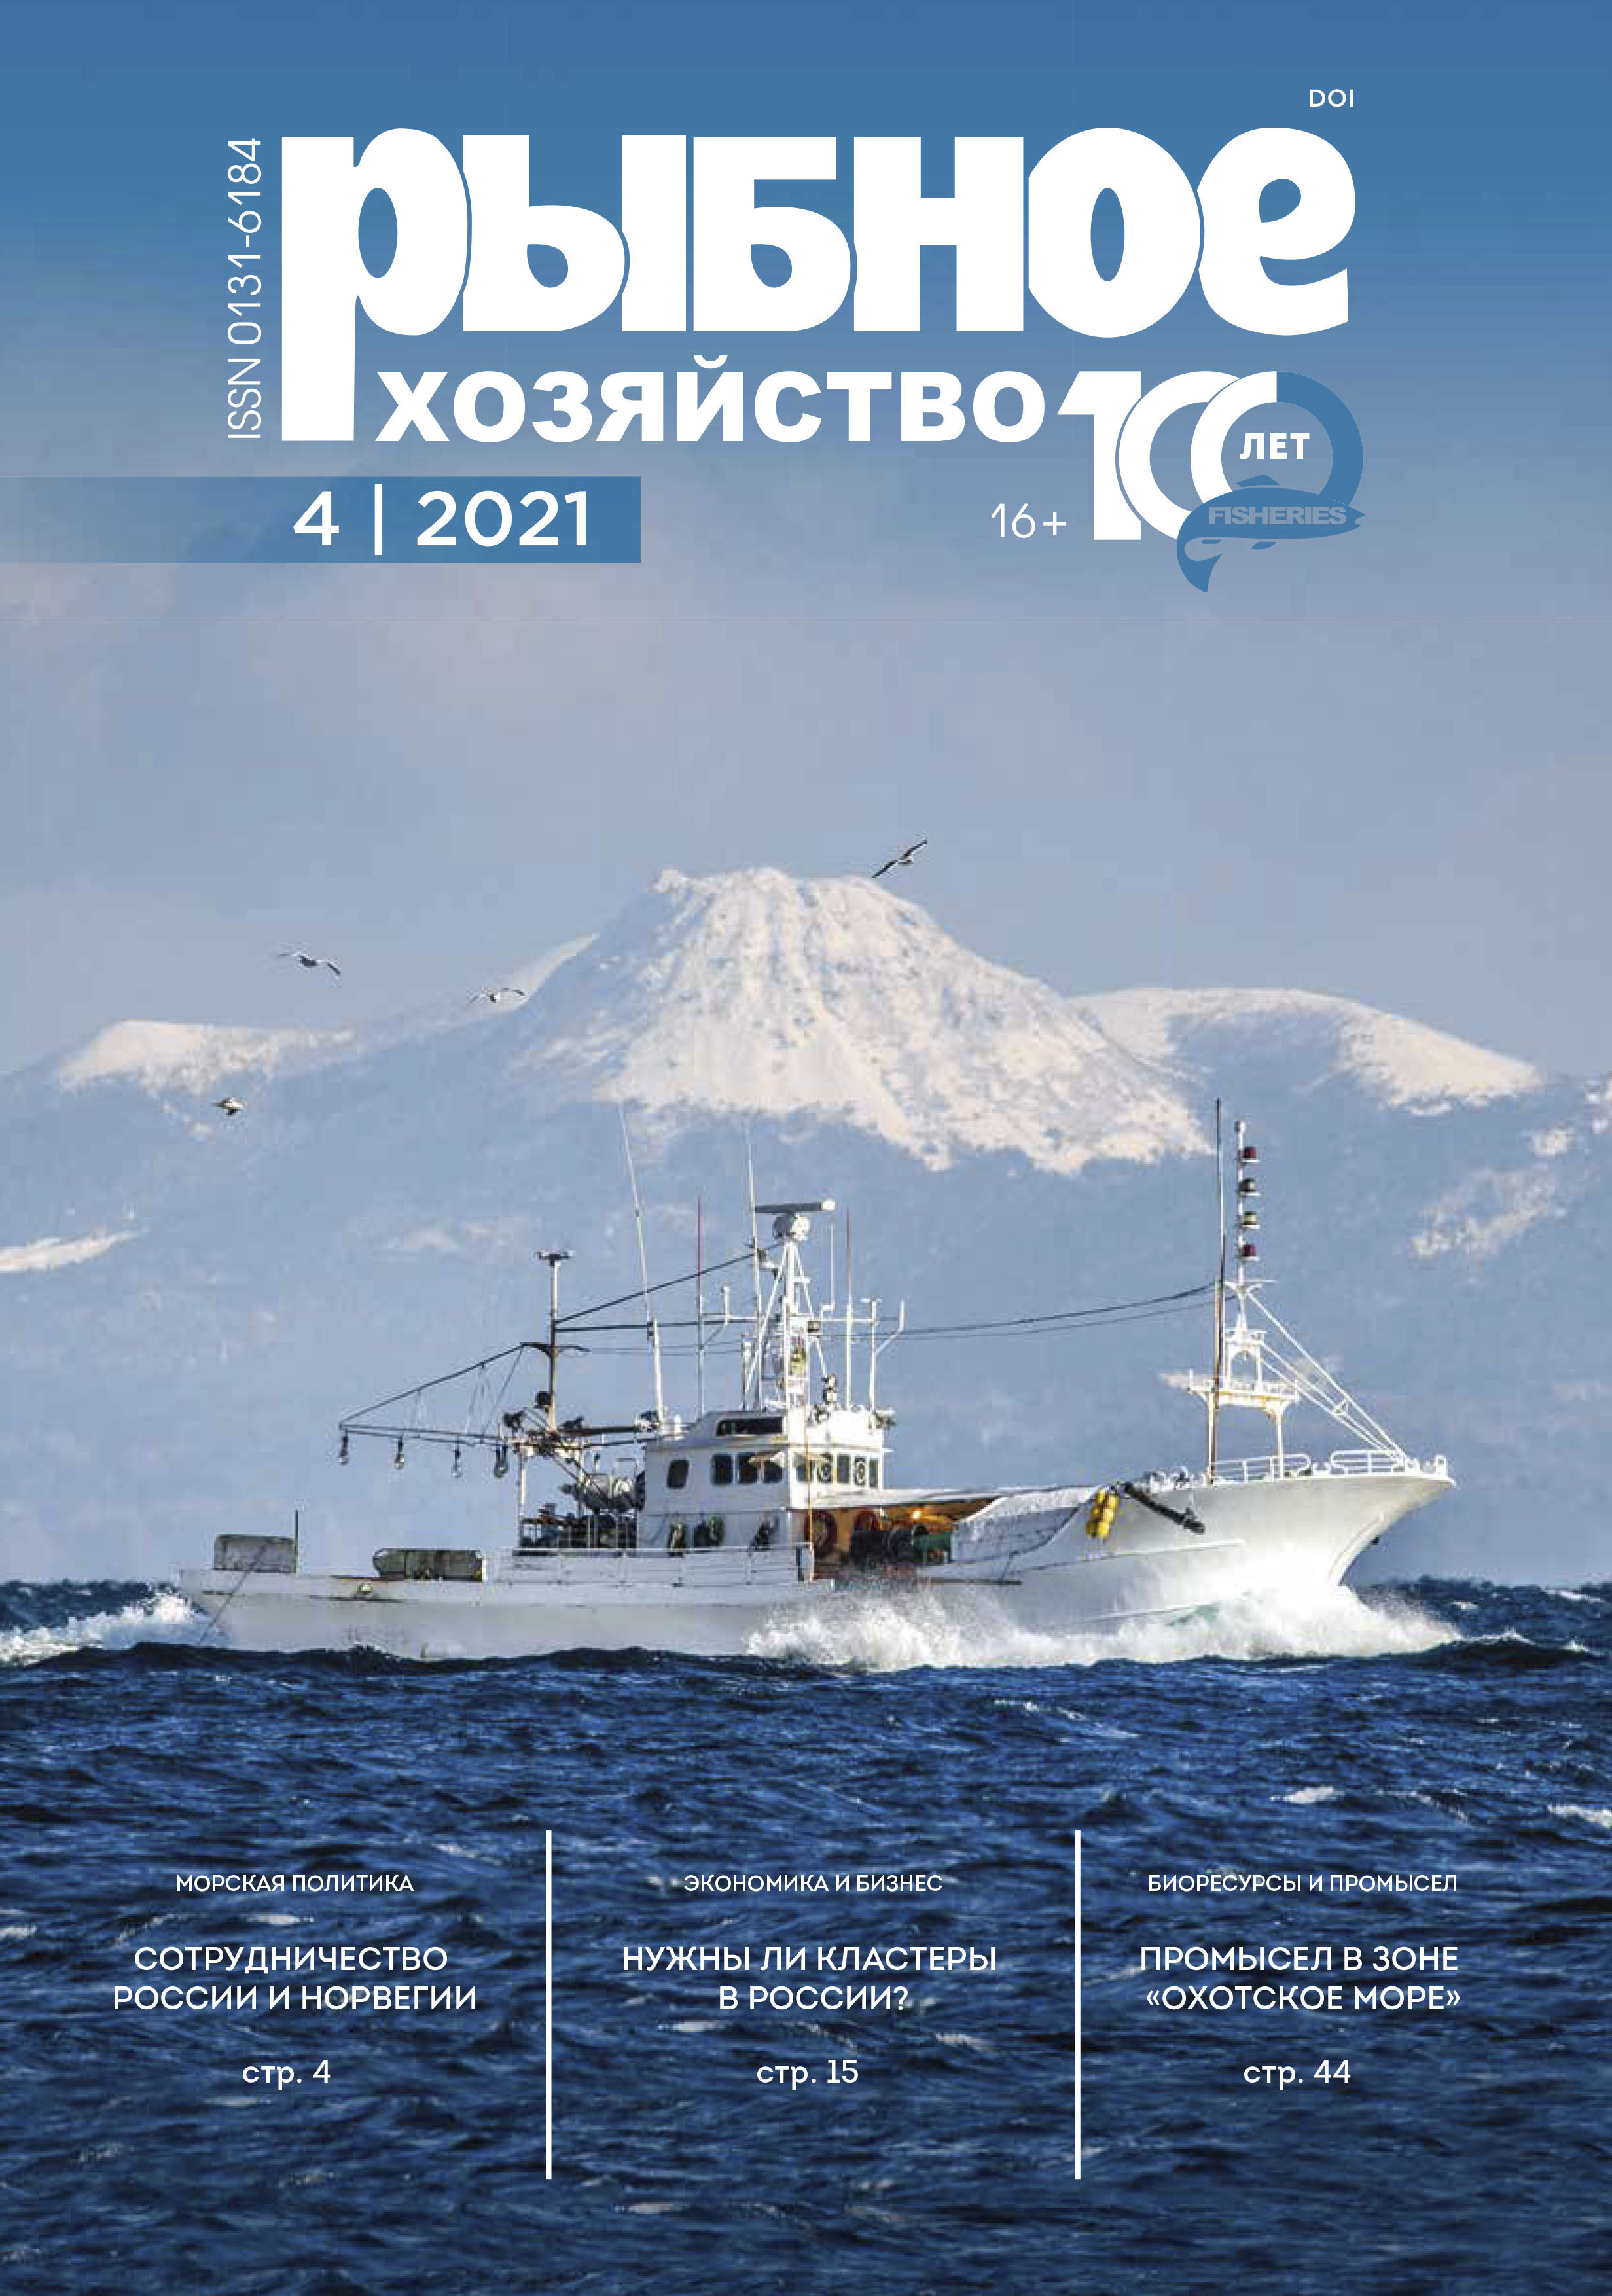                         The content of mercury and lead in the feed base of valuable fish species of the Caspian Sea
            